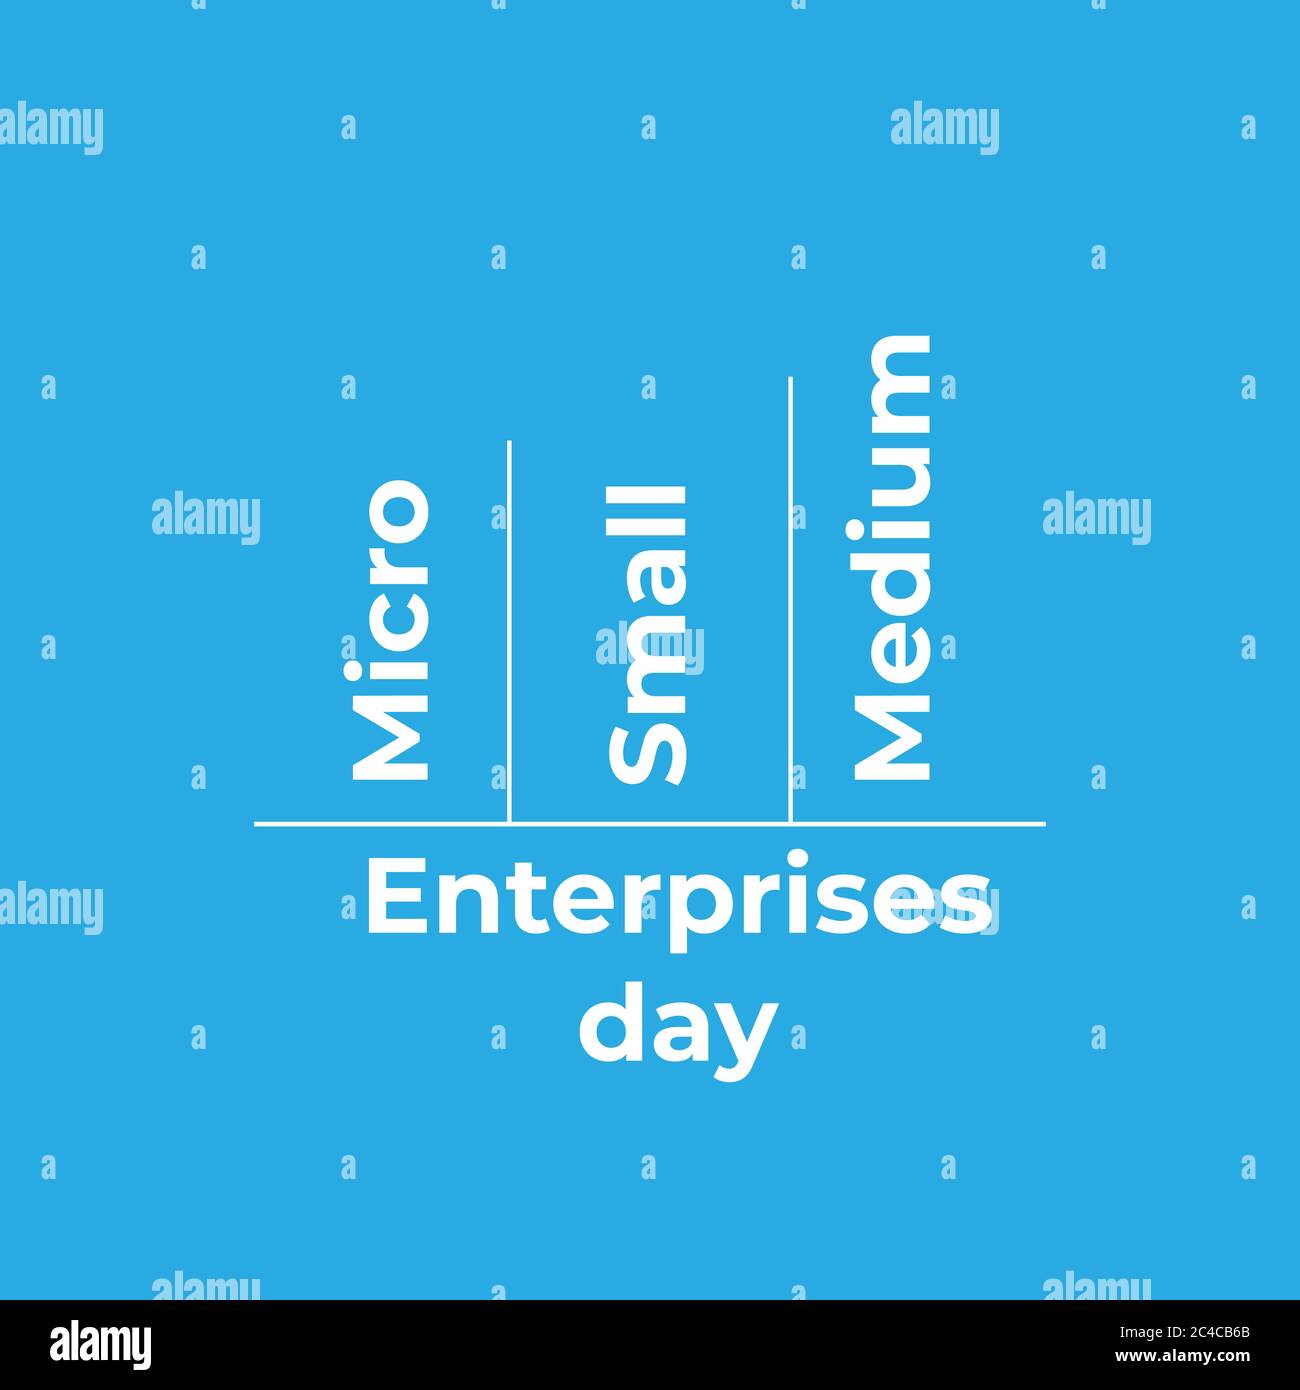 Design for Micro-, Small and Medium-sized Enterprises Day campaign to raise public awareness of their contribution to sustainable development. Stock Vector